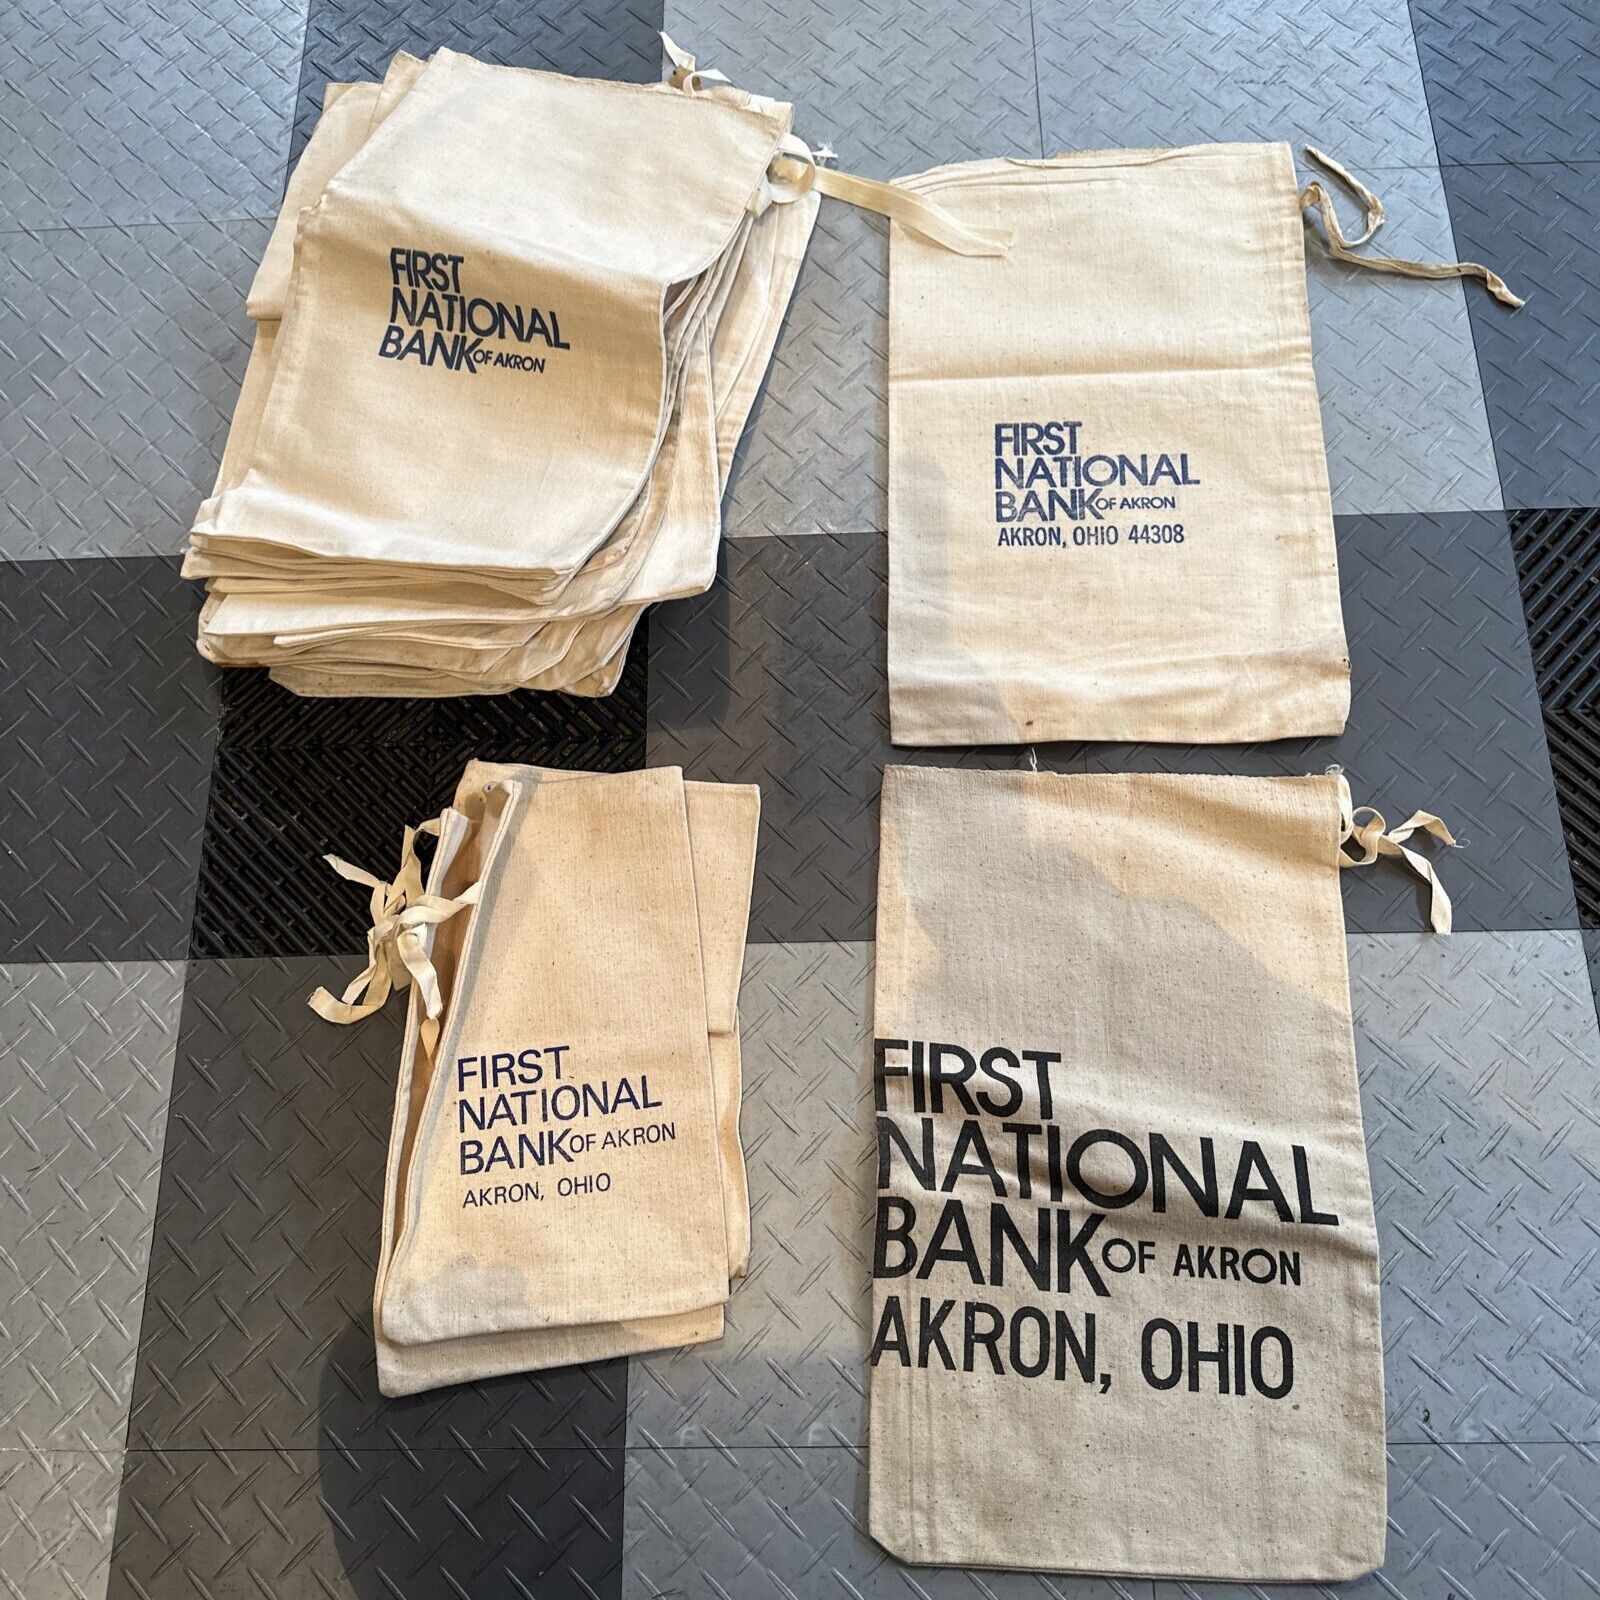 CANVAS BANK MONEY DEPOSIT BAGS - LOT OF 22 Rare Coin Vintage